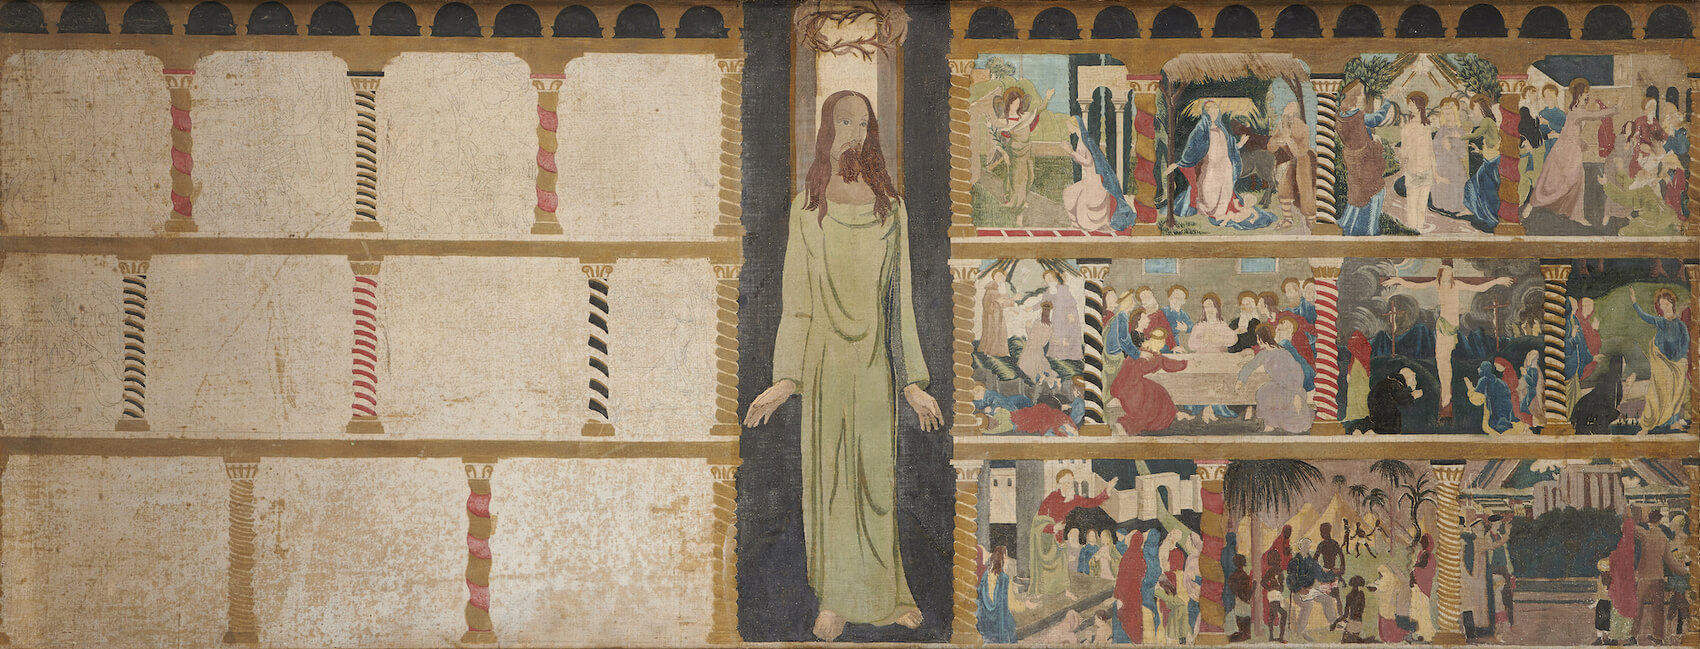 Mary Adshead - Scenes from the Life of Christ: Preaching the Gospel